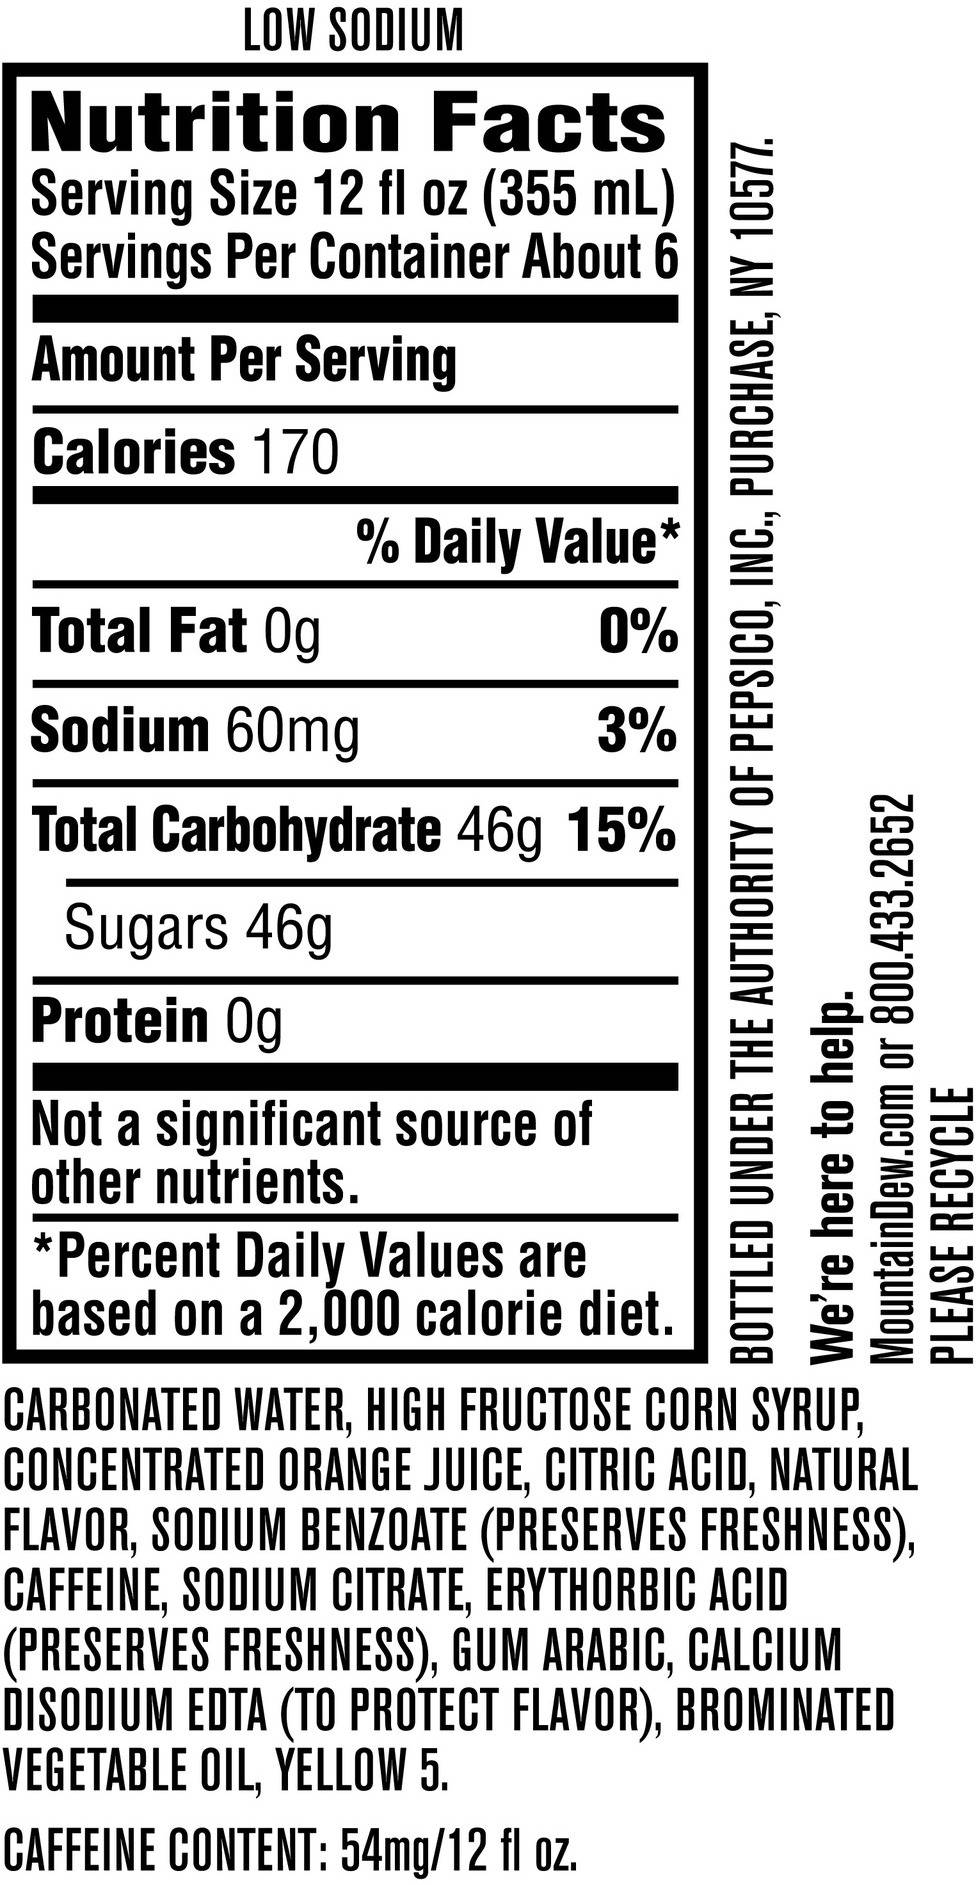 Image describing nutrition information for product Mtn Dew (Sam's Club)